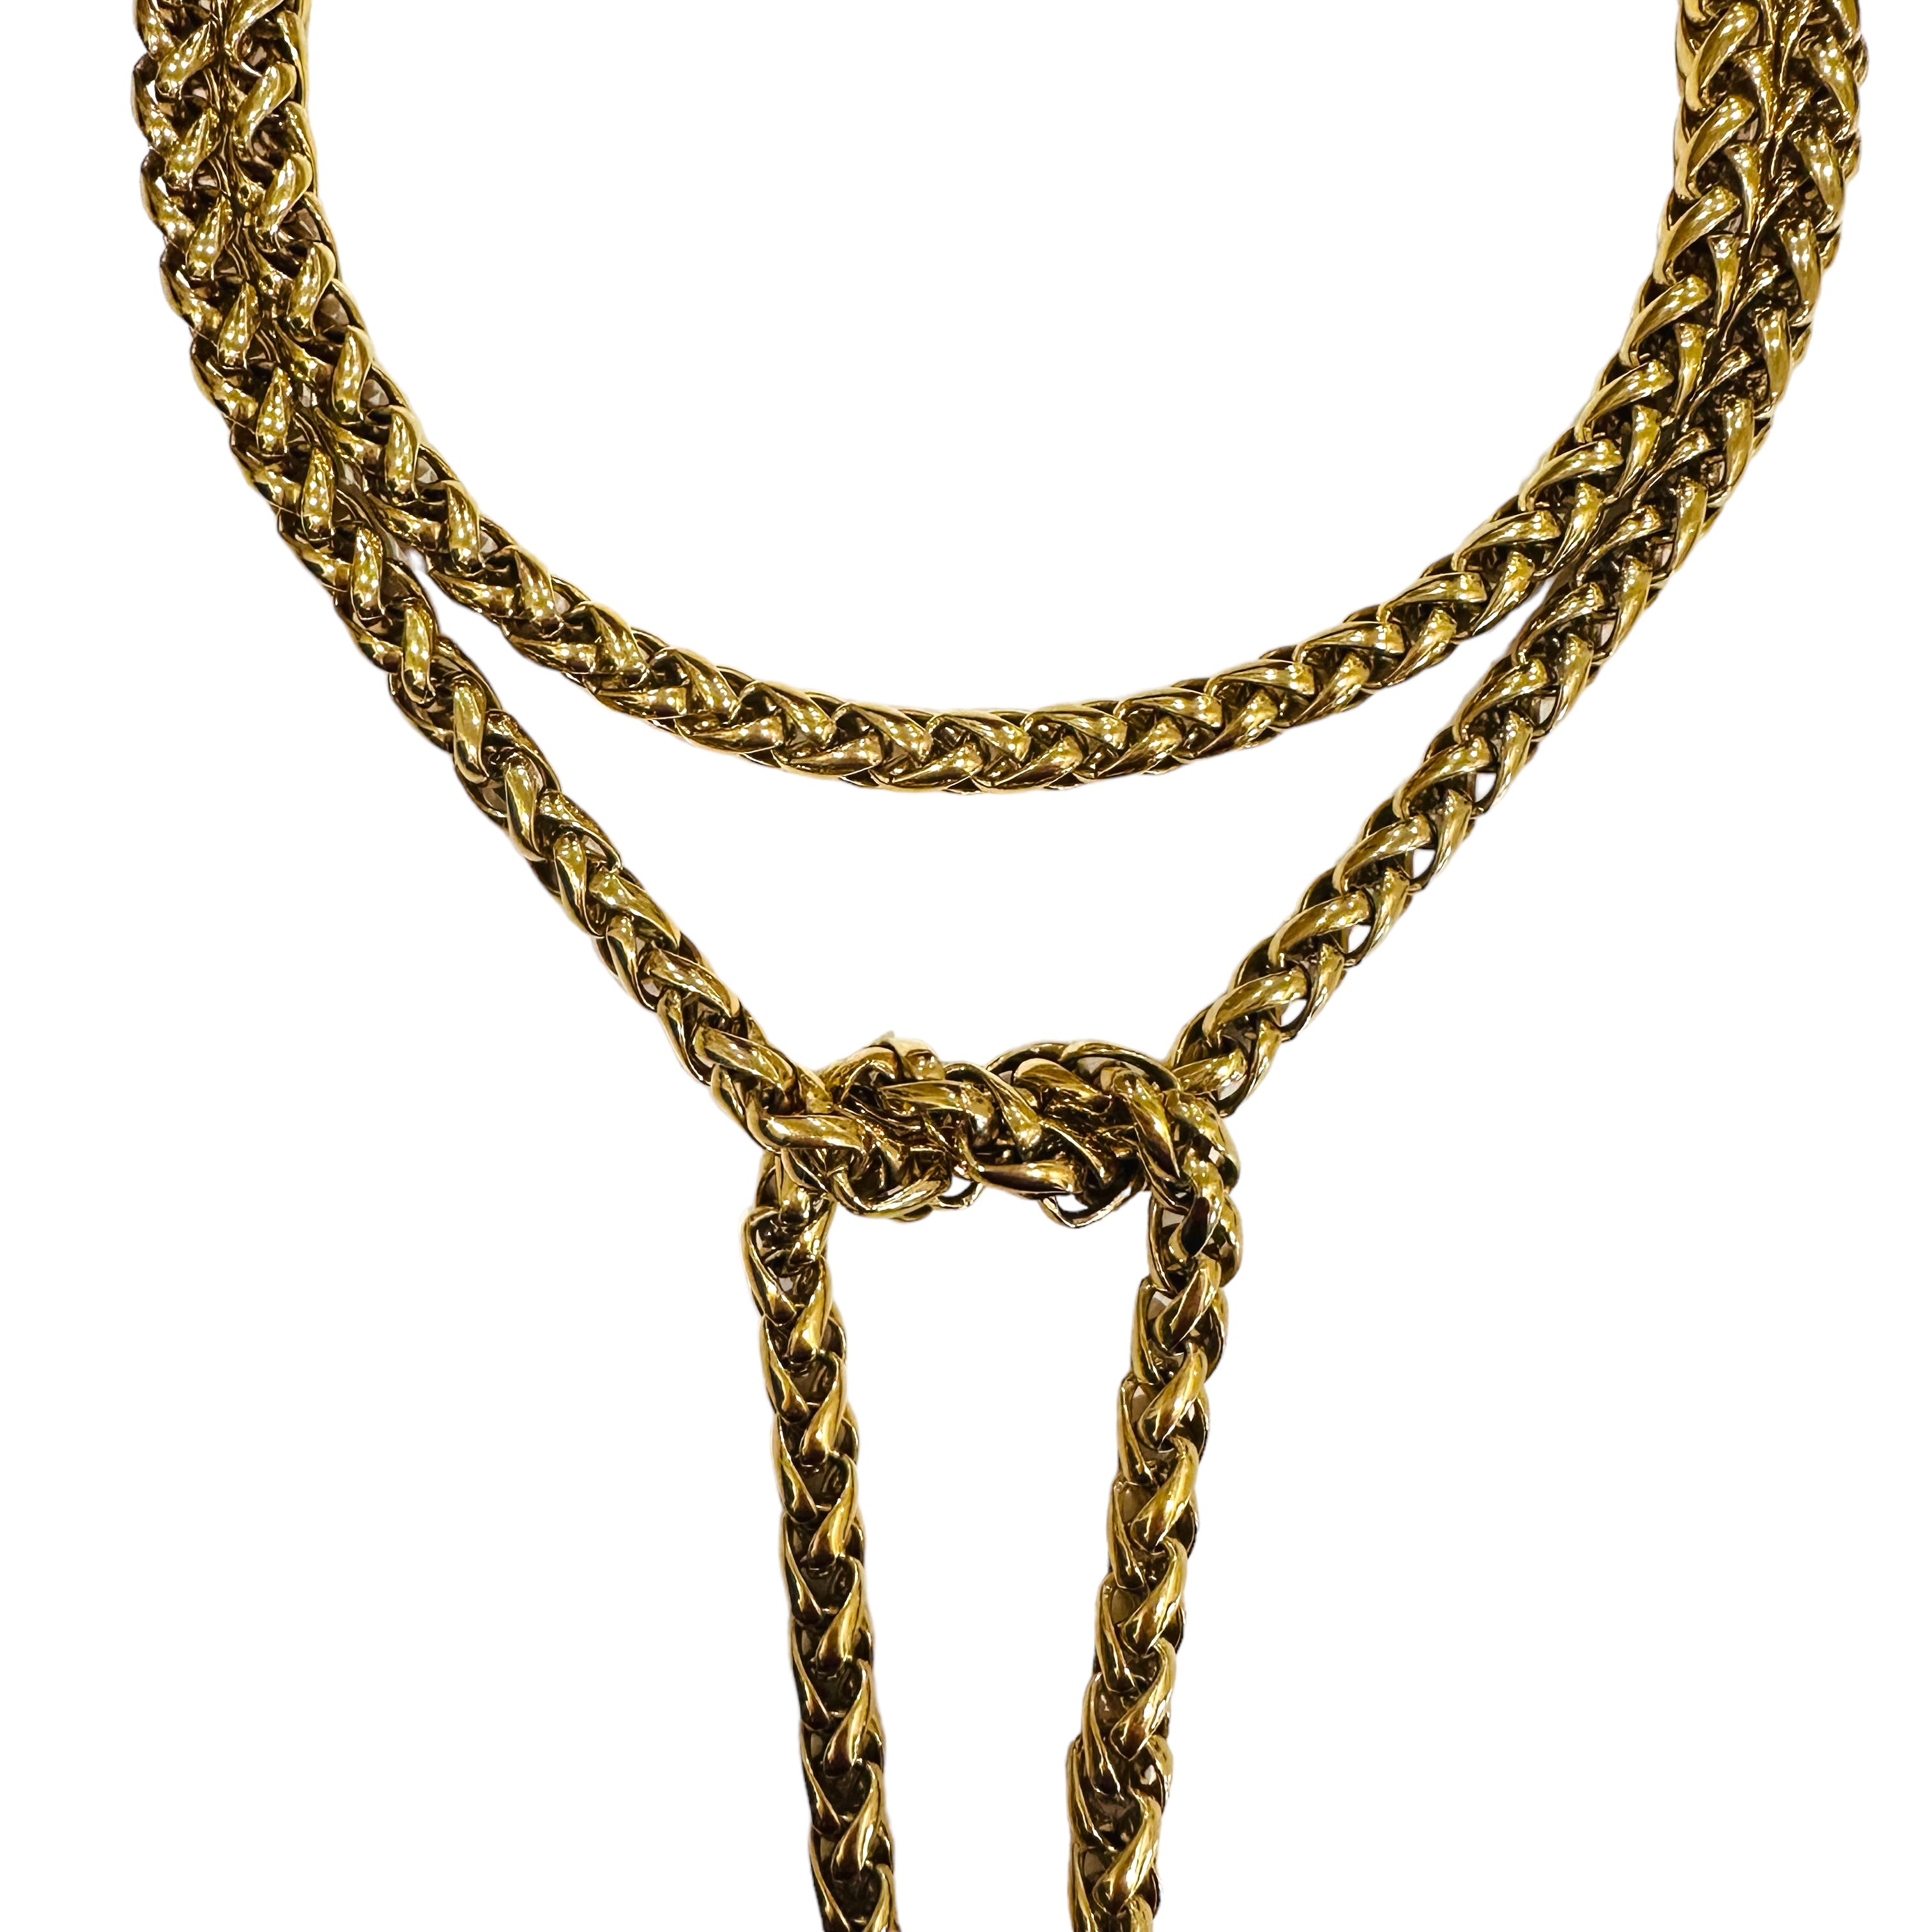 Rope Tie Necklace-As Seen on Andrea's Lookbook